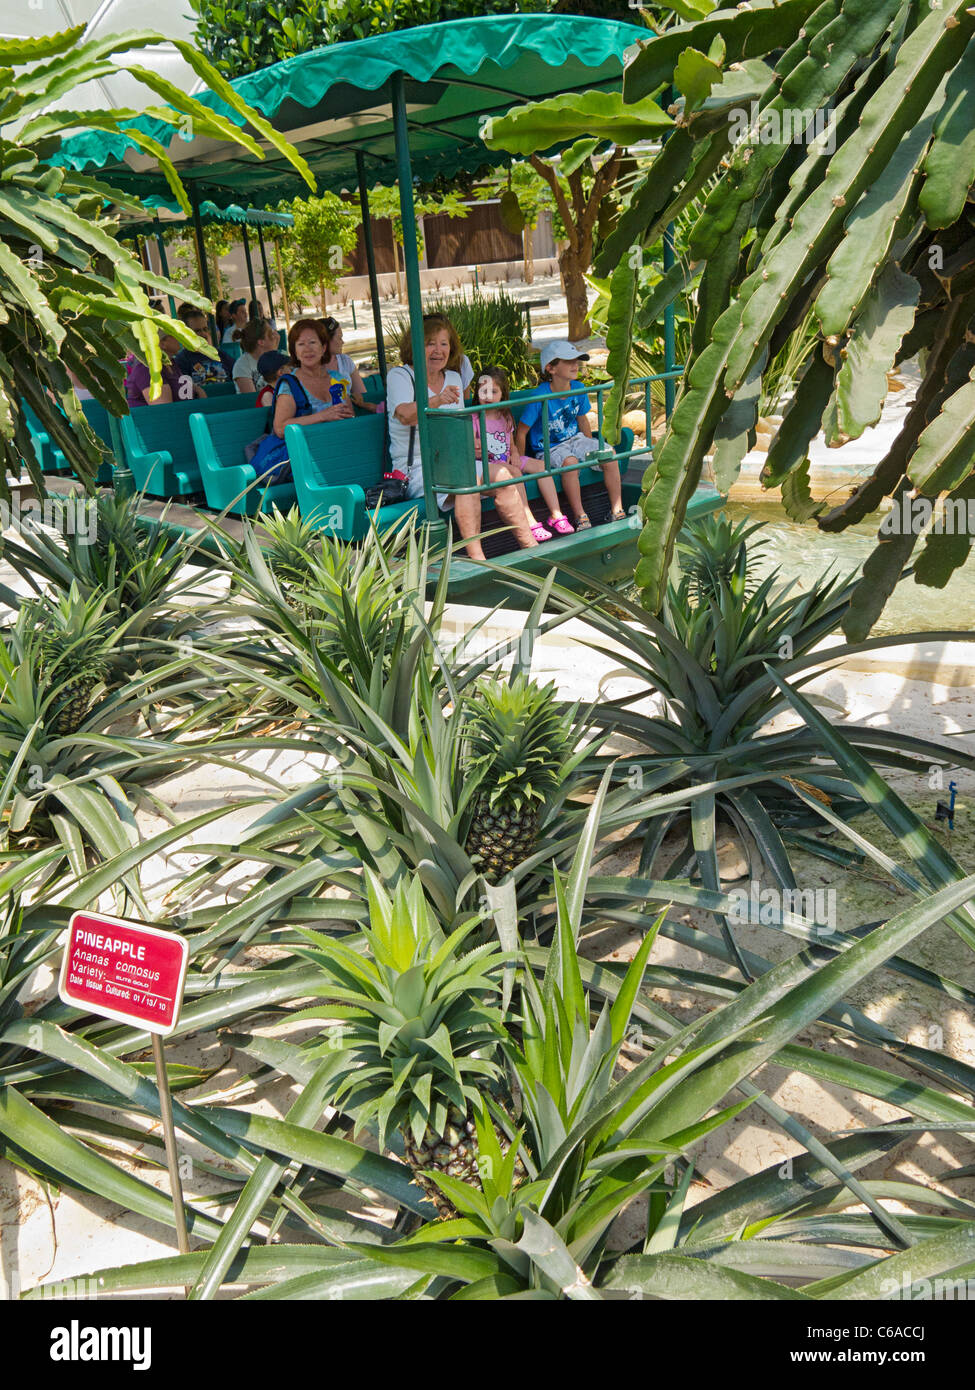 Tourists in boat travel past pinepple plants at Disney World's 'Living With The Land' tour at the Land Pavilion, Epcot, Florida Stock Photo